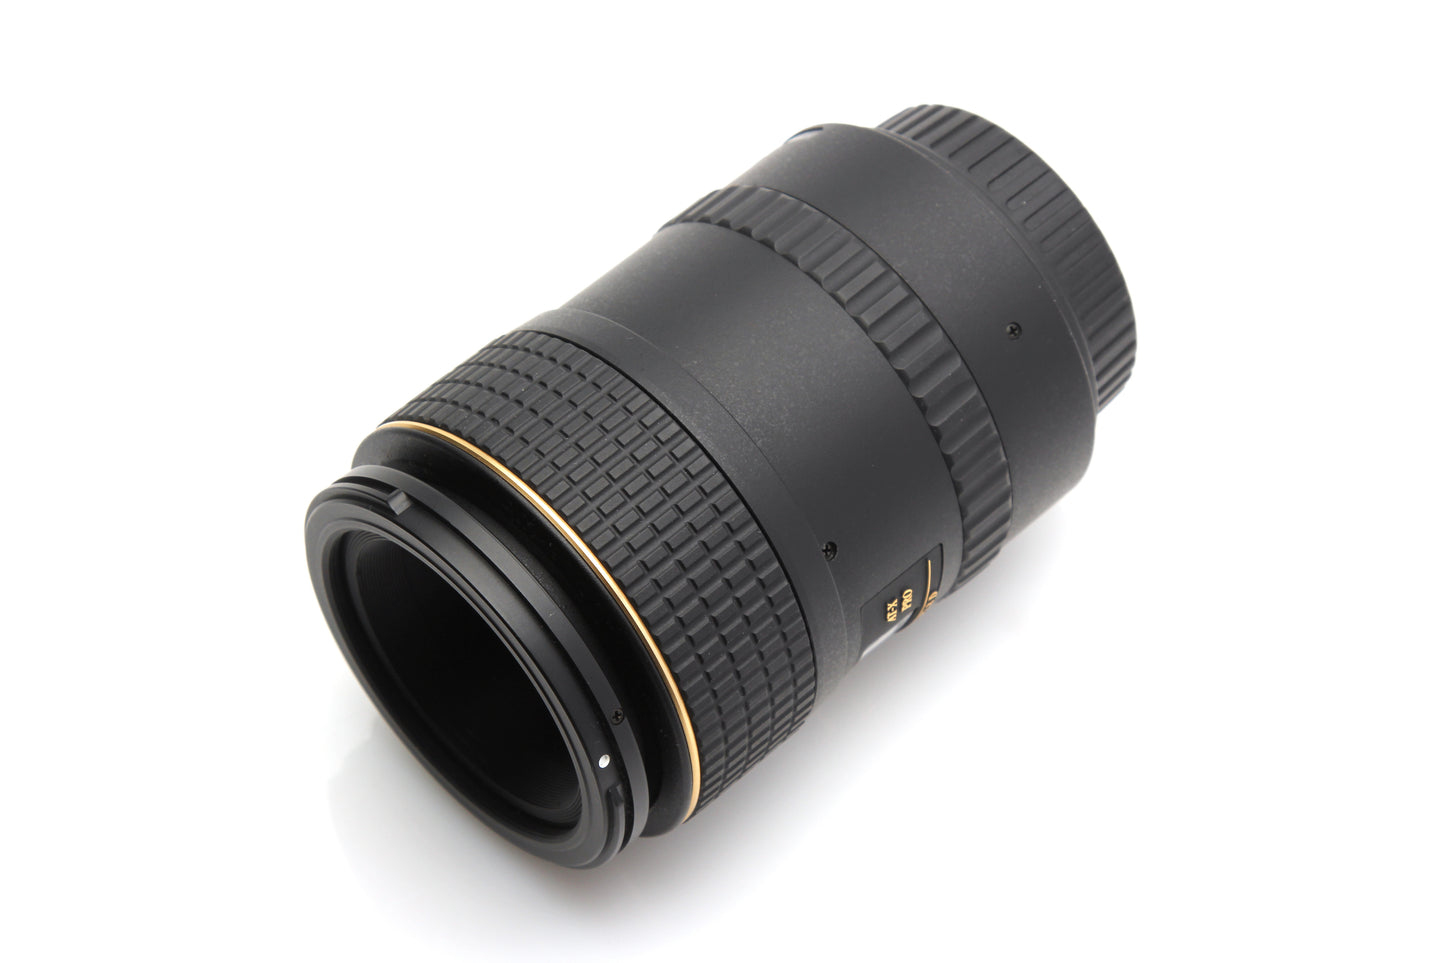 Used Tokina AT-X PRO M 100mm F/2.8D Macro for Canon